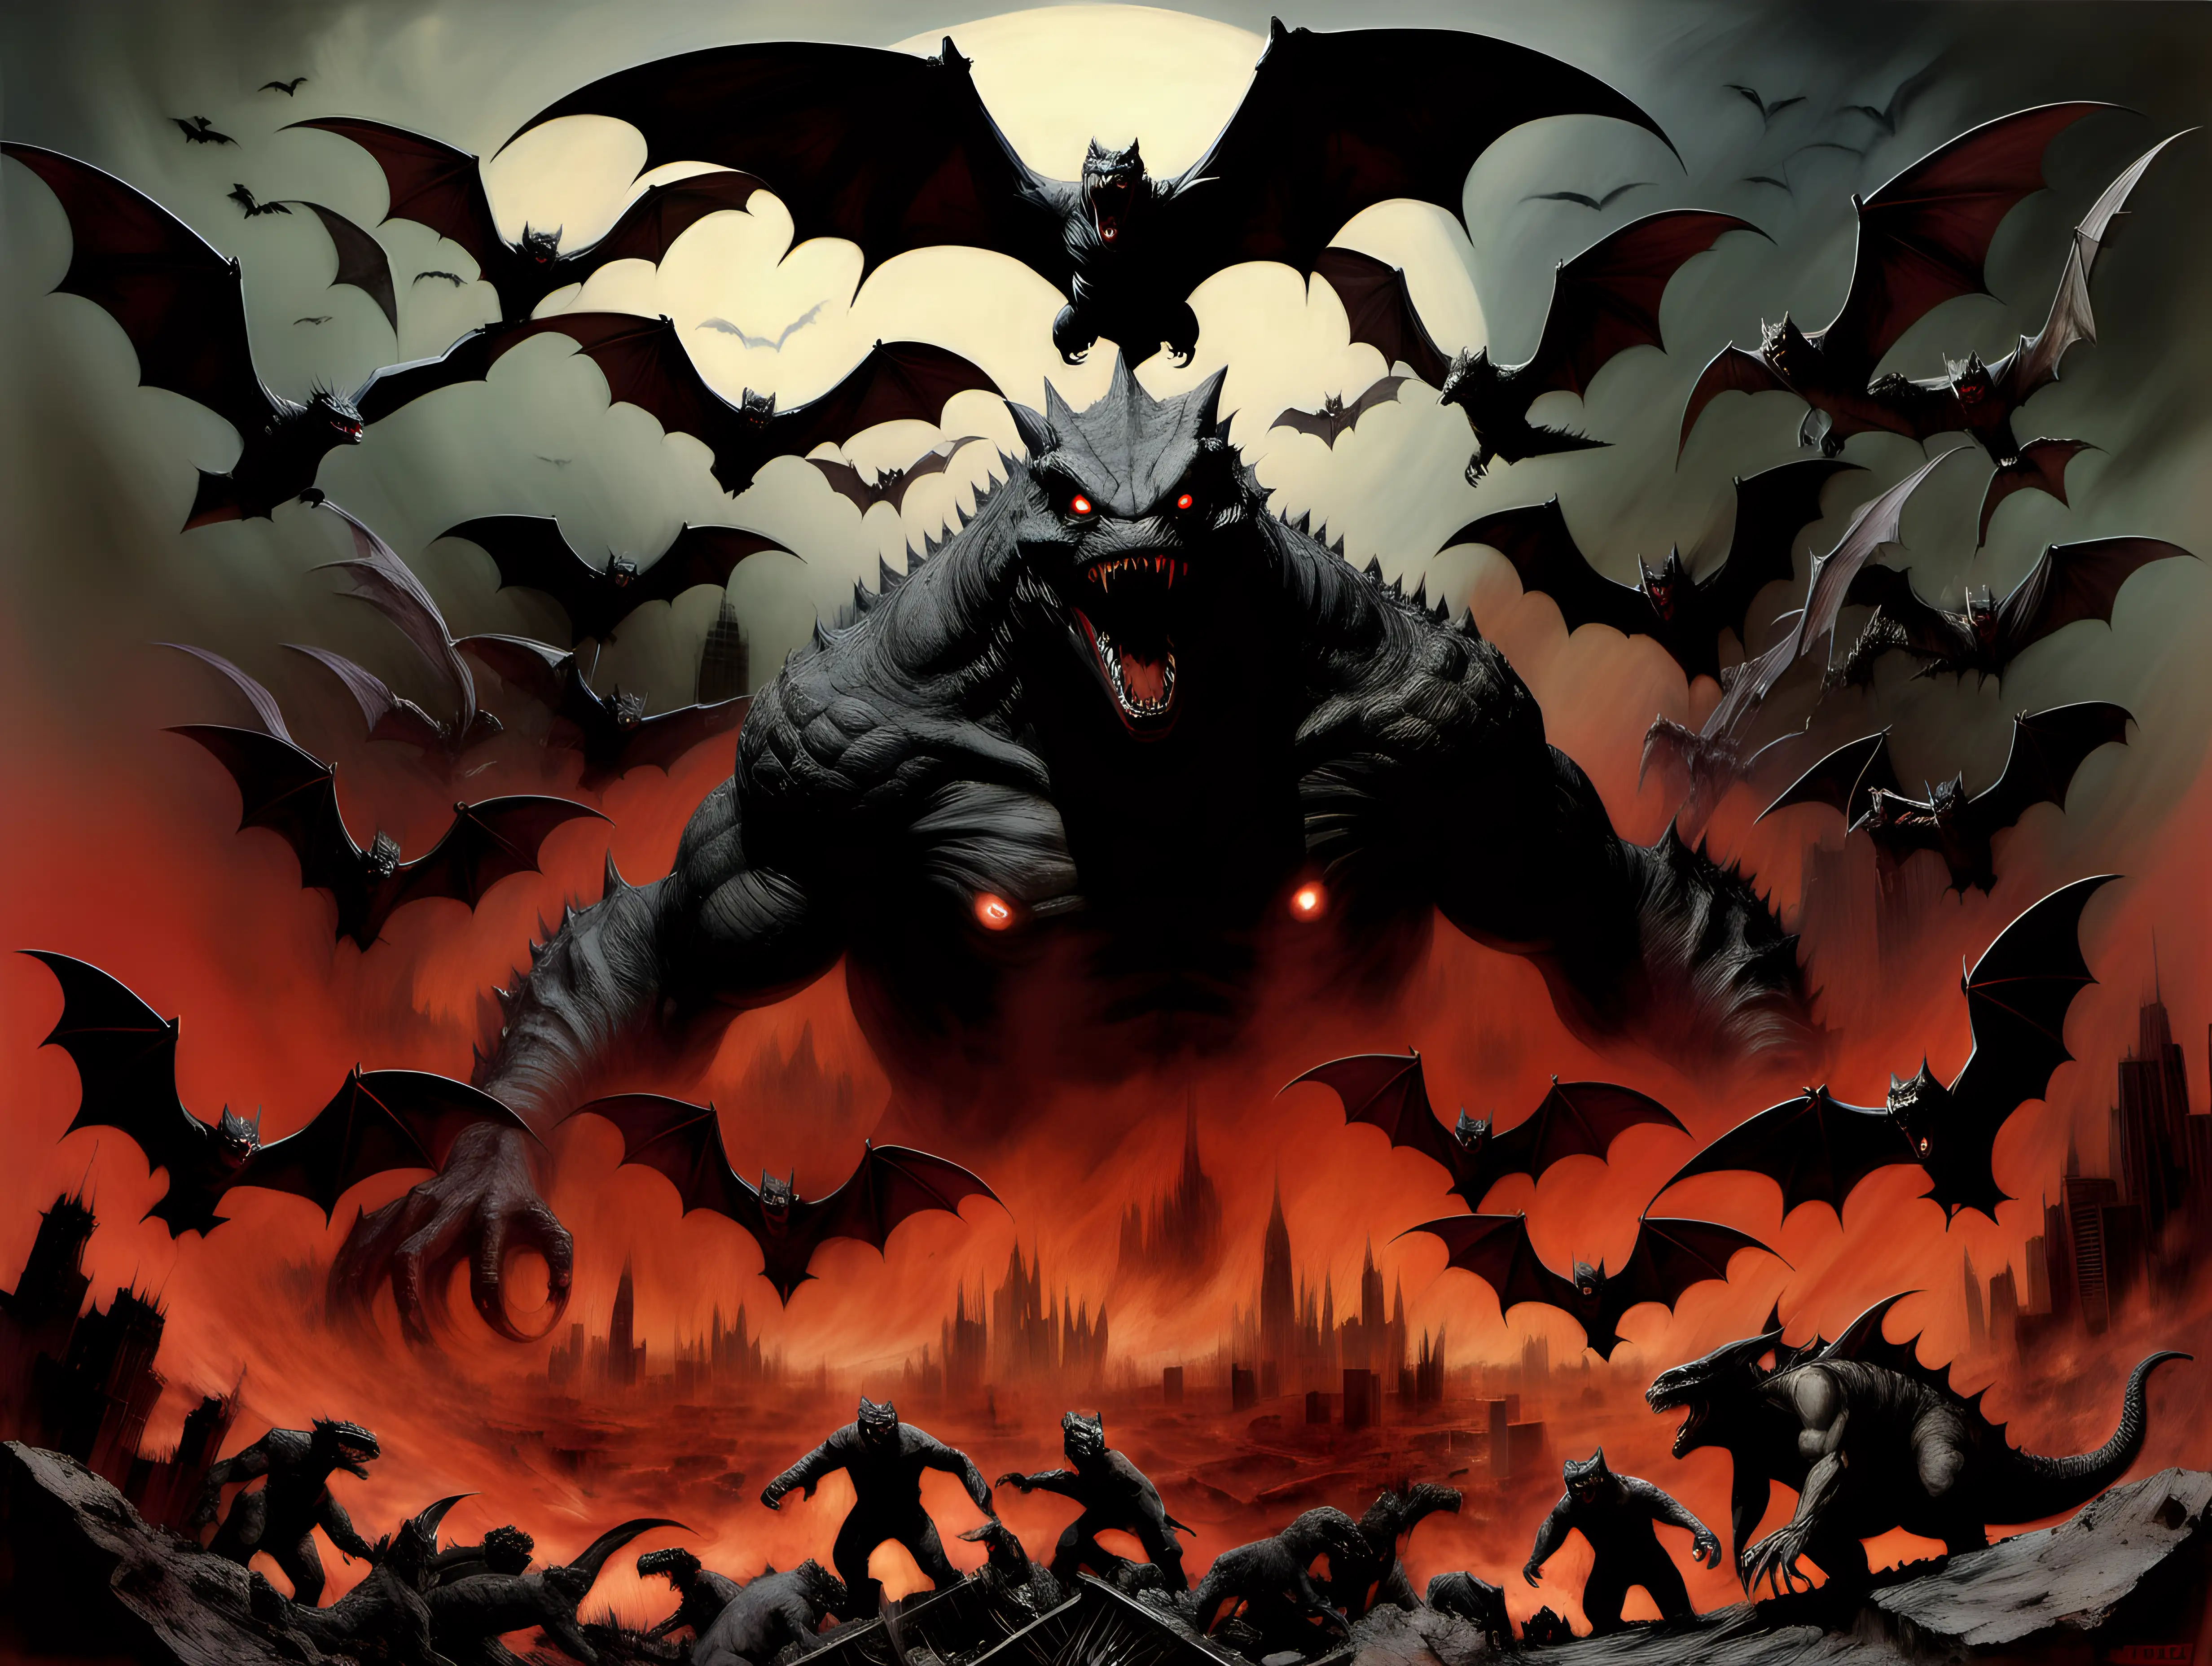 Dante's 9 circles of Hell with Godzilla and vampire bats in style of post-apocalyptic and photorealism by frank frazetta